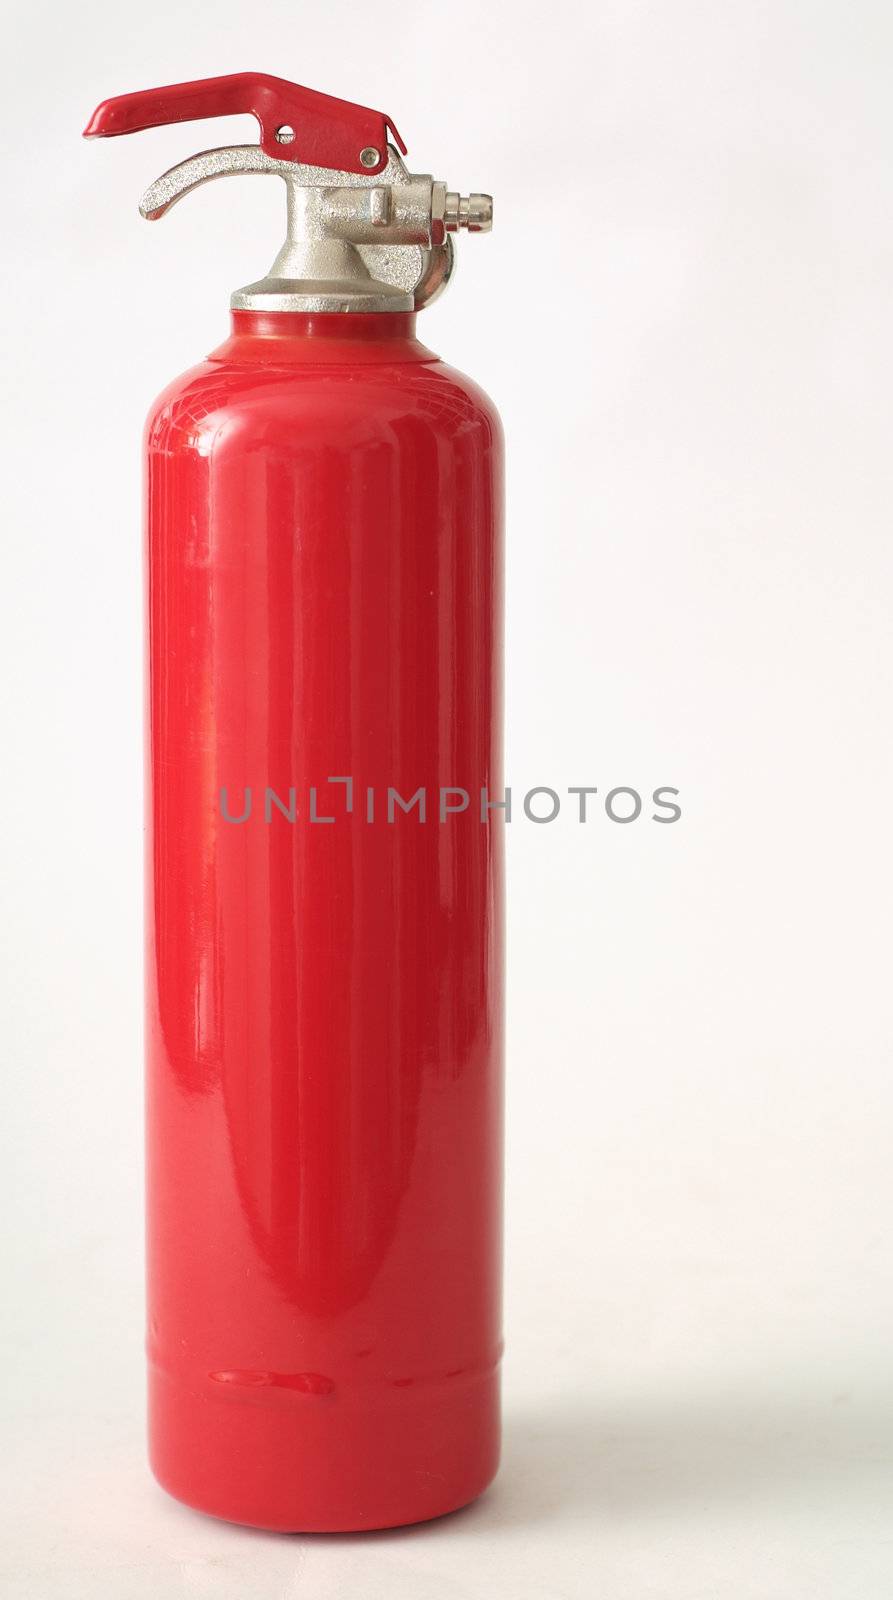 Red fire extinguisher on white